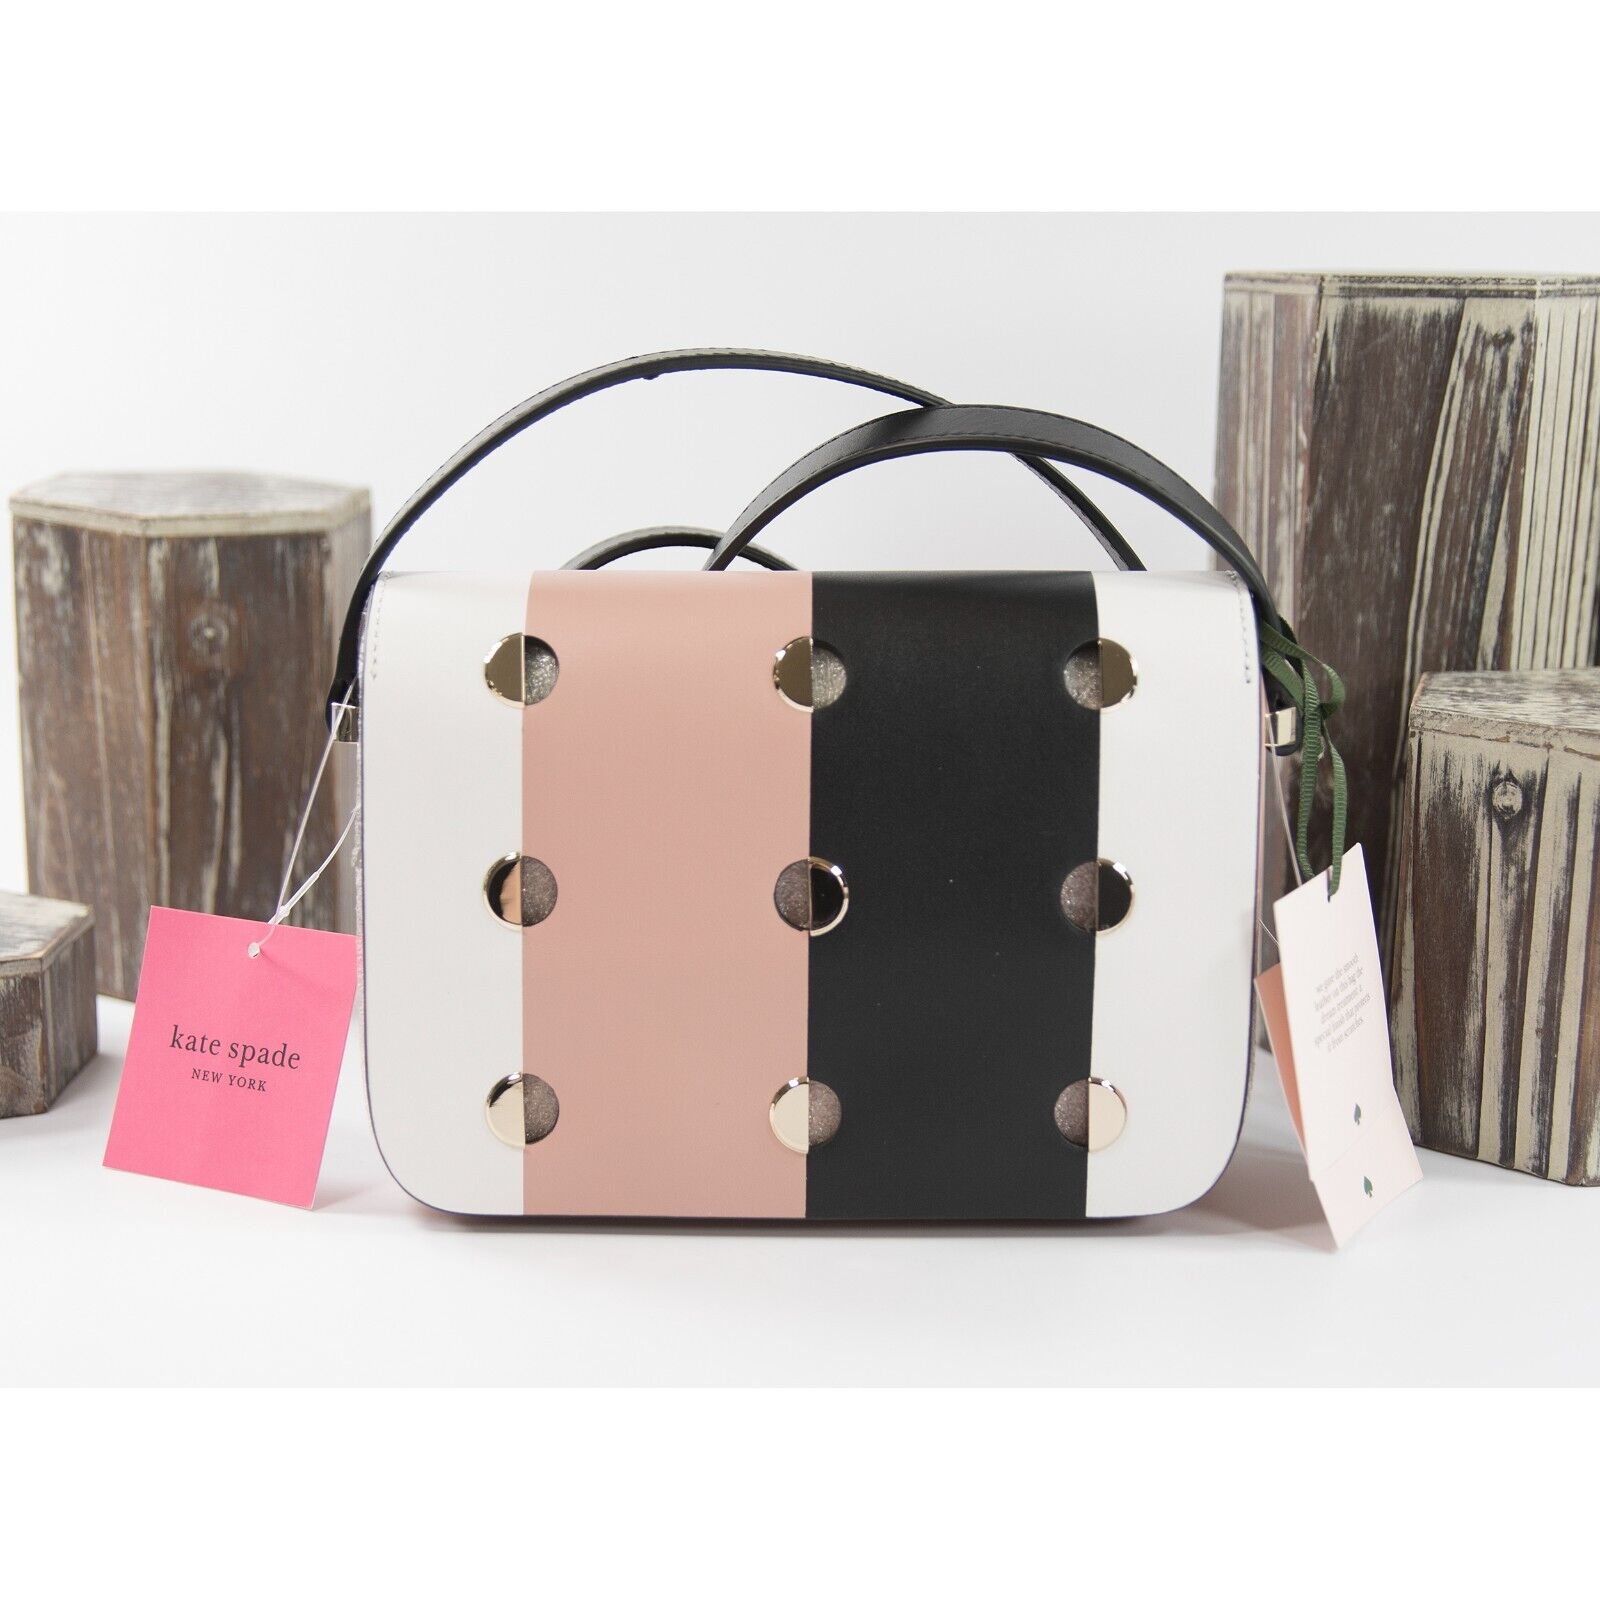 Kate Spade Black with Pink crossbody